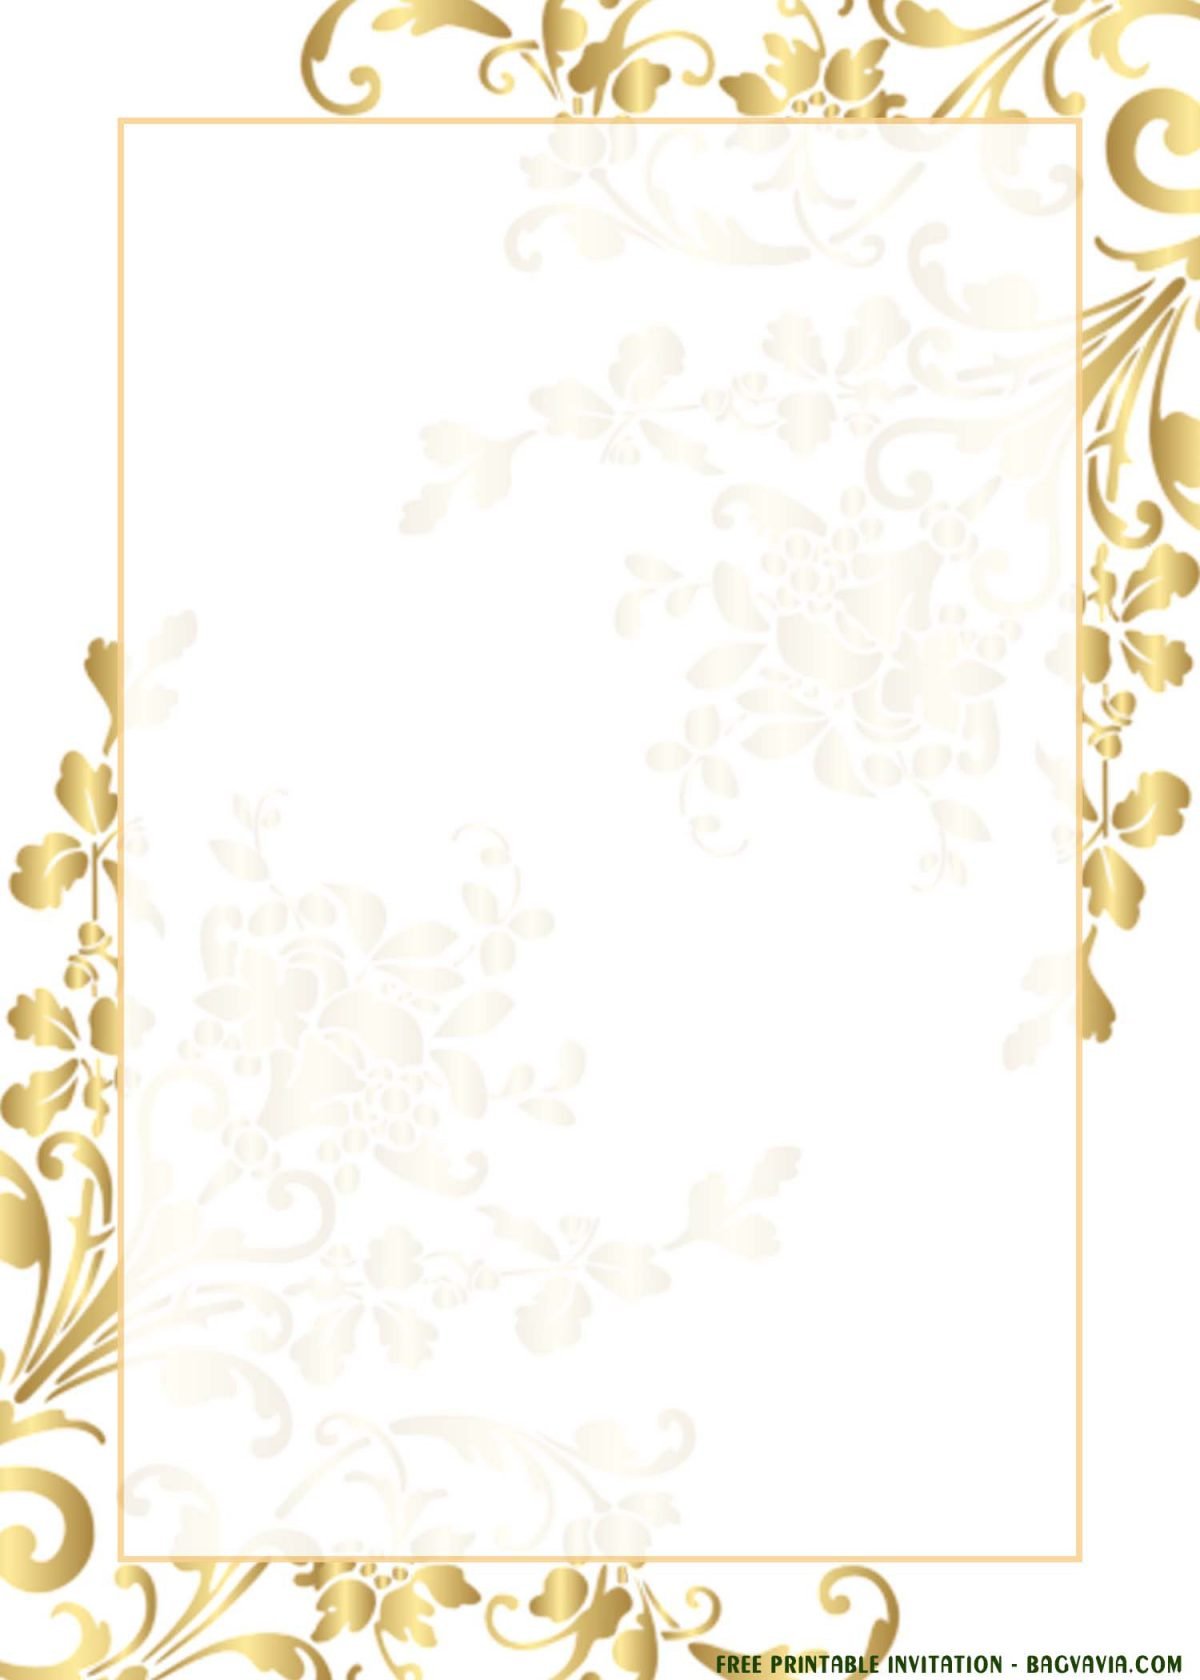 Free Printable Gold Lace Invitation Templates For Any Occasions With Portrait Orientatio Cards